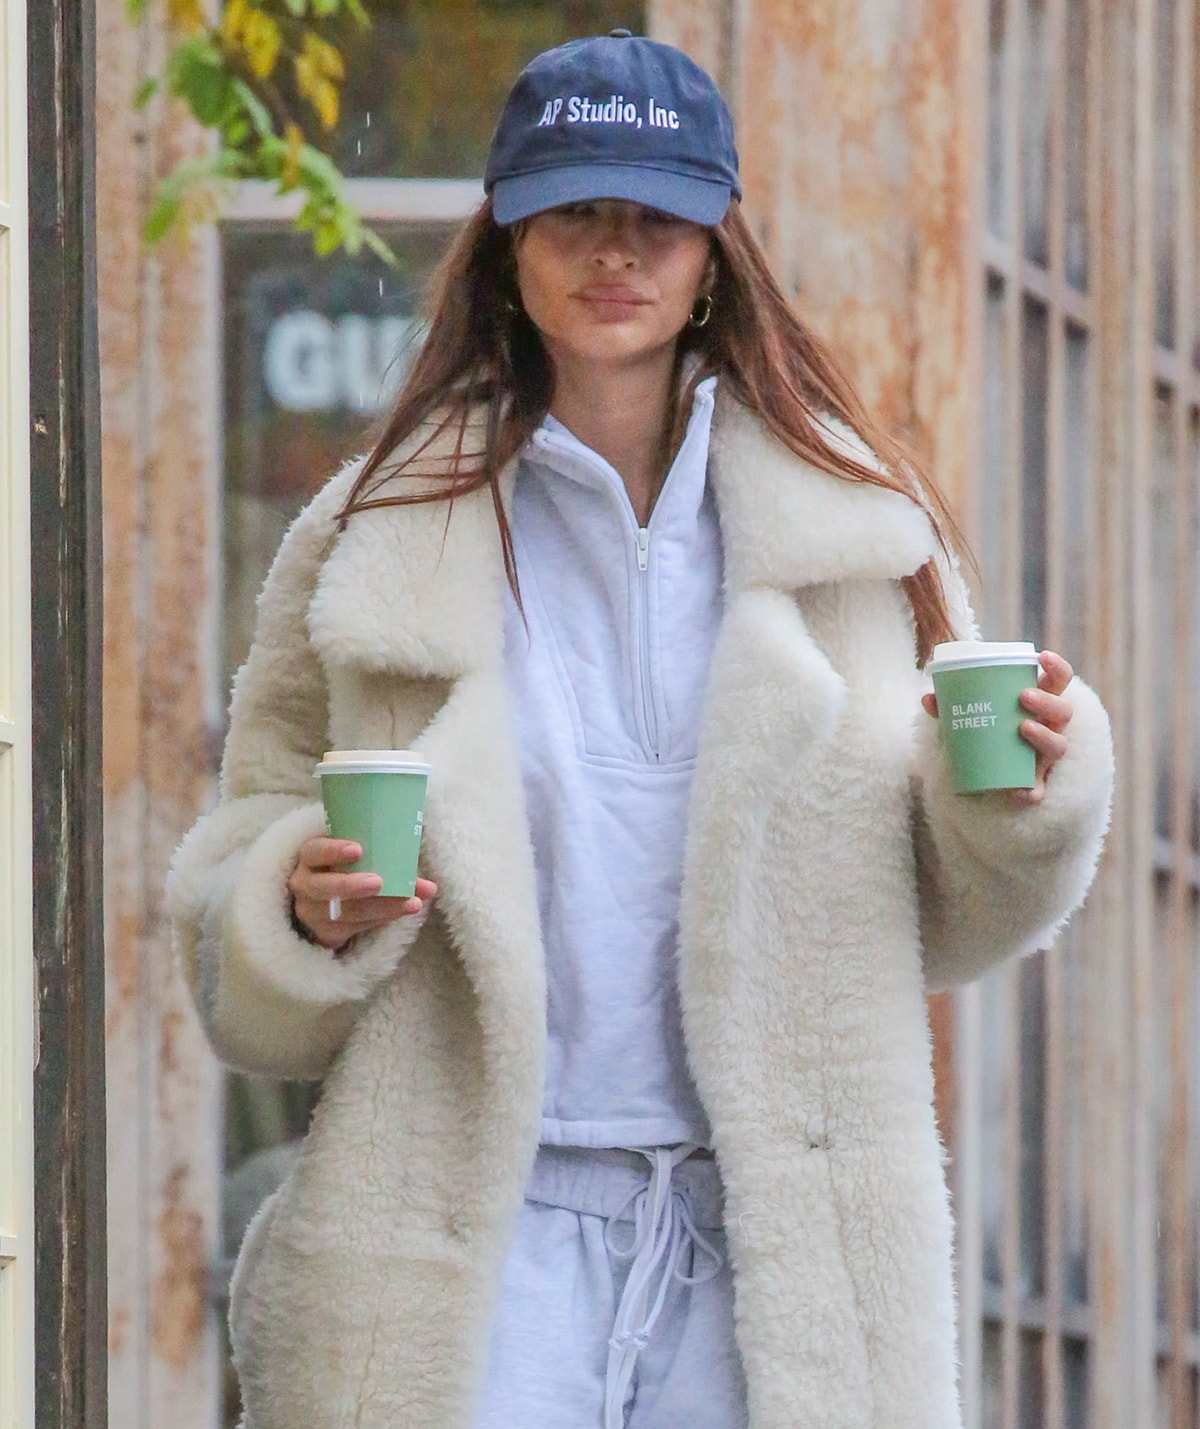 Emily Ratajkowski tucks her straightened brown hair beneath her AP Studio, Inc. baseball cap and wears her signature nude makeup for her casual stroll